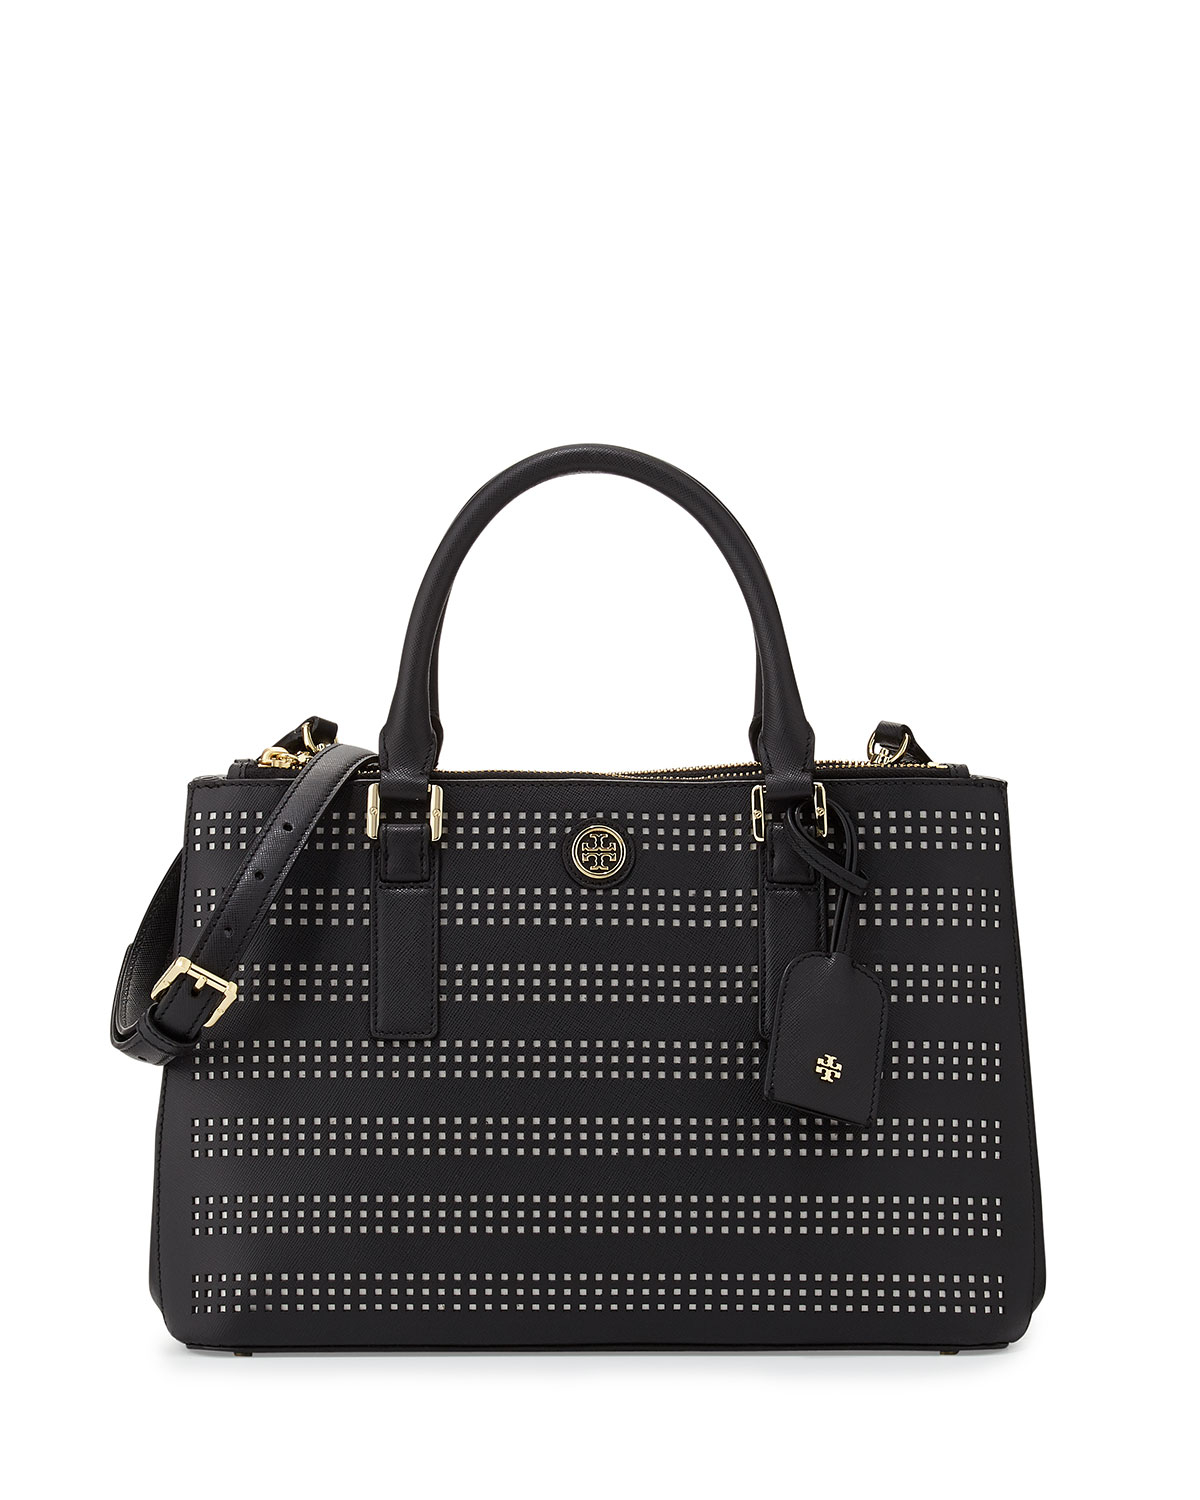 Tory burch Robinson Perforated Double-Zip Tote Bag in Black (BLACK